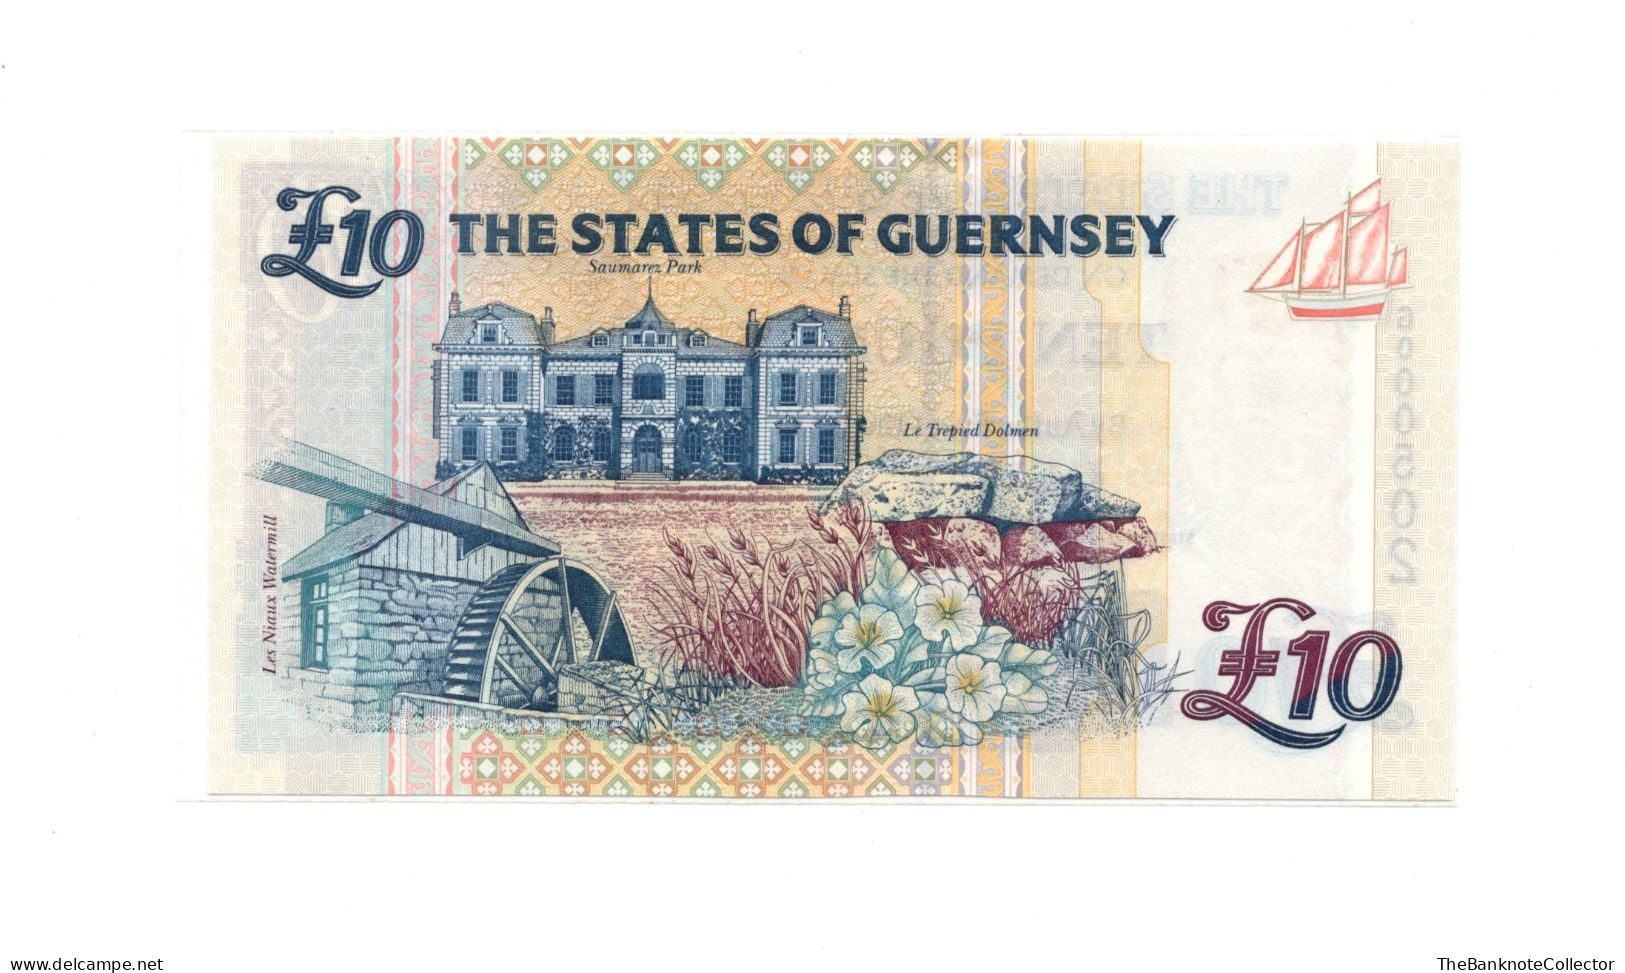 Guernsey 10 Pounds ND1996 QEII P-57 UNC - Guernesey